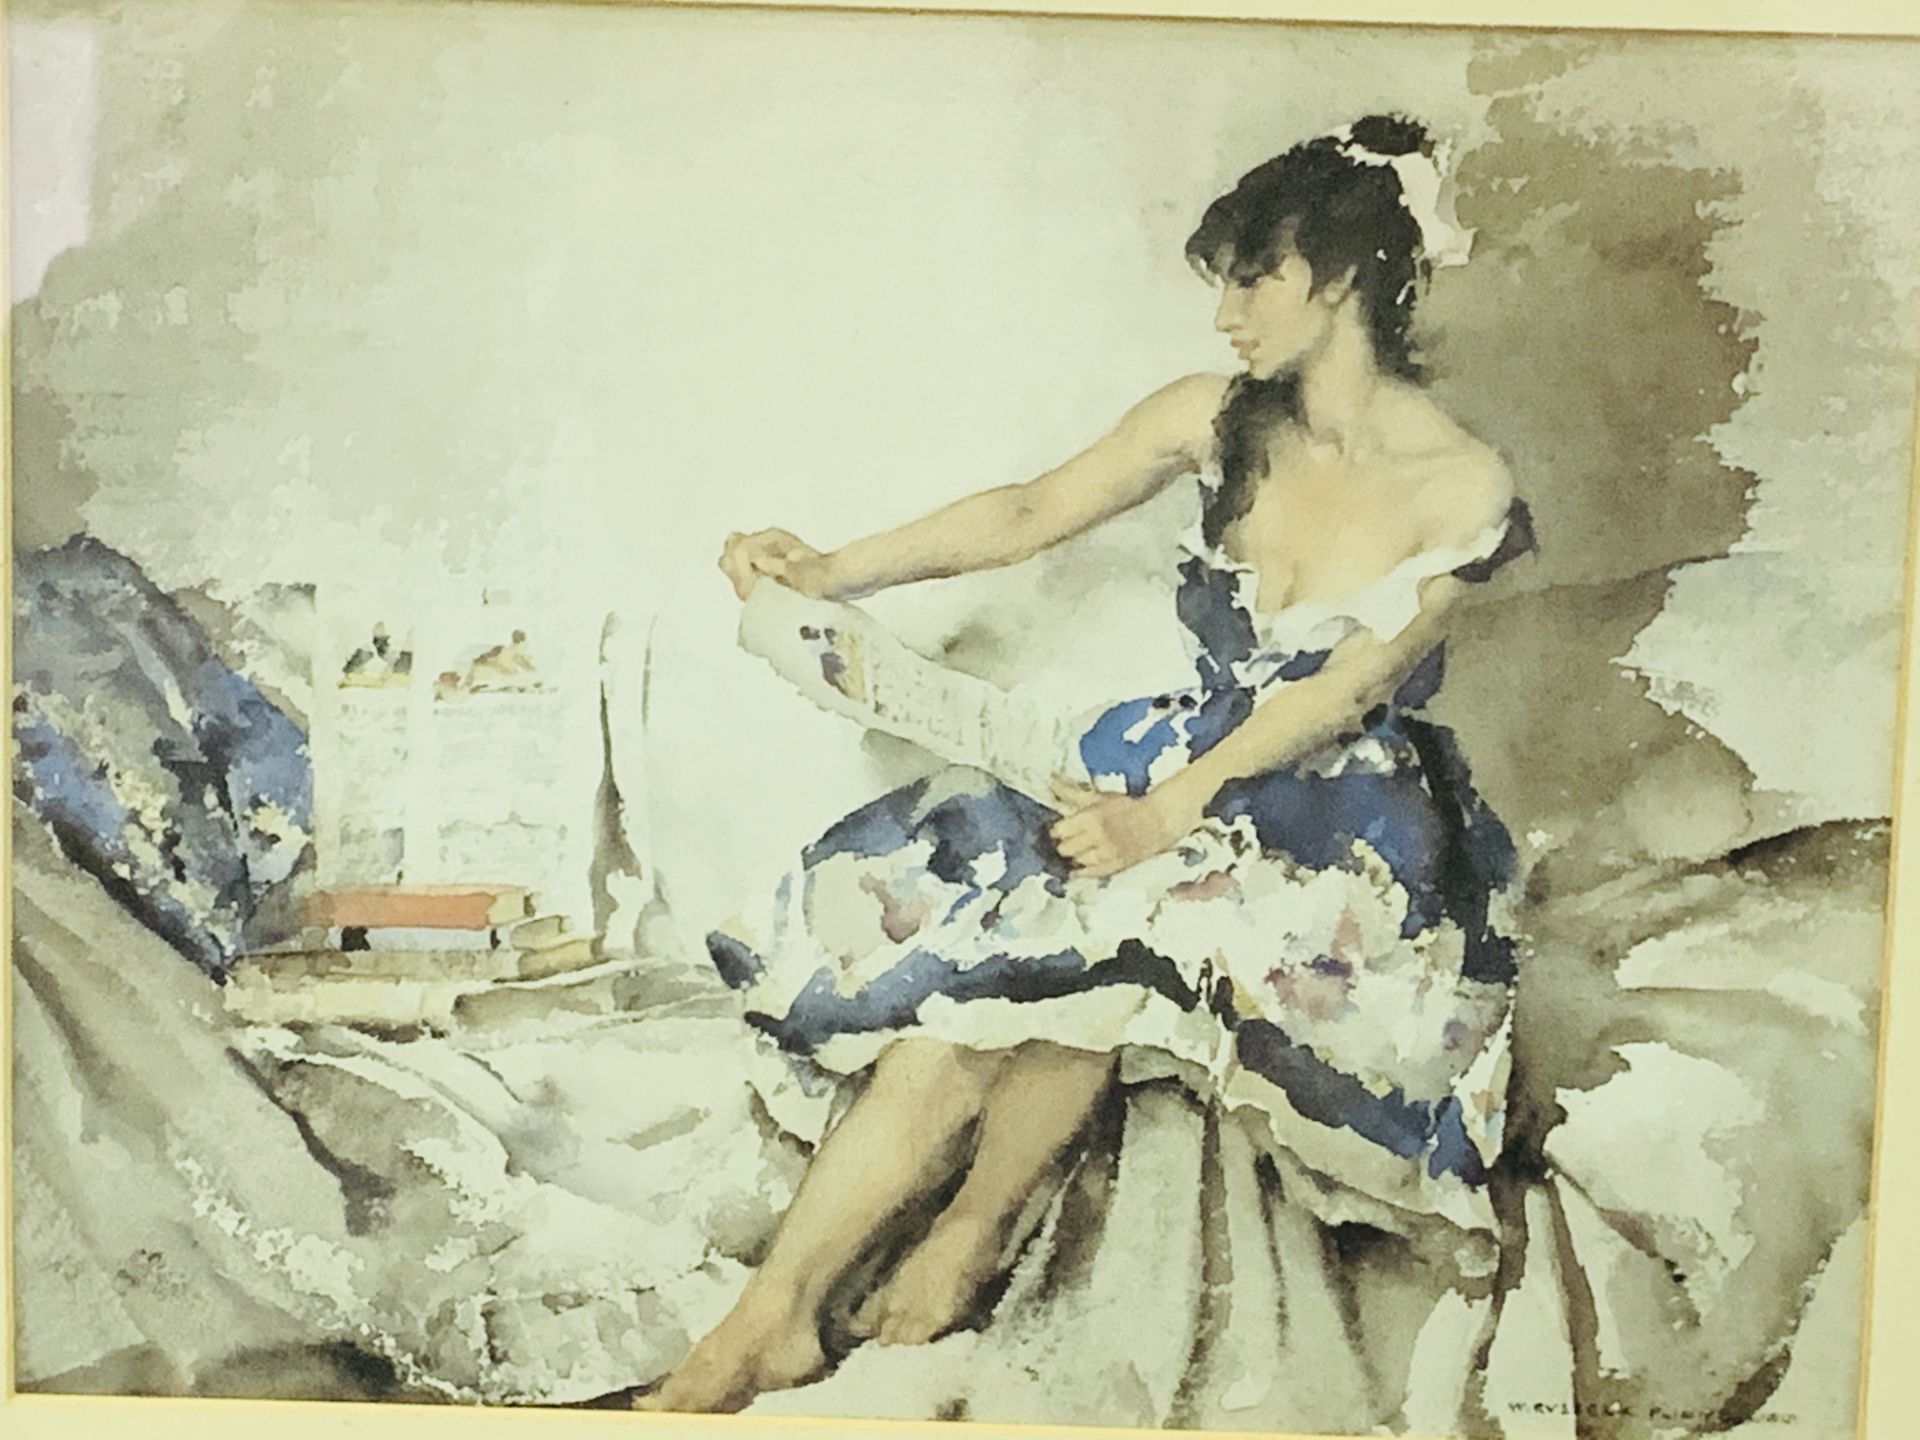 3 framed and glazed prints by Sir William Russell-Flint